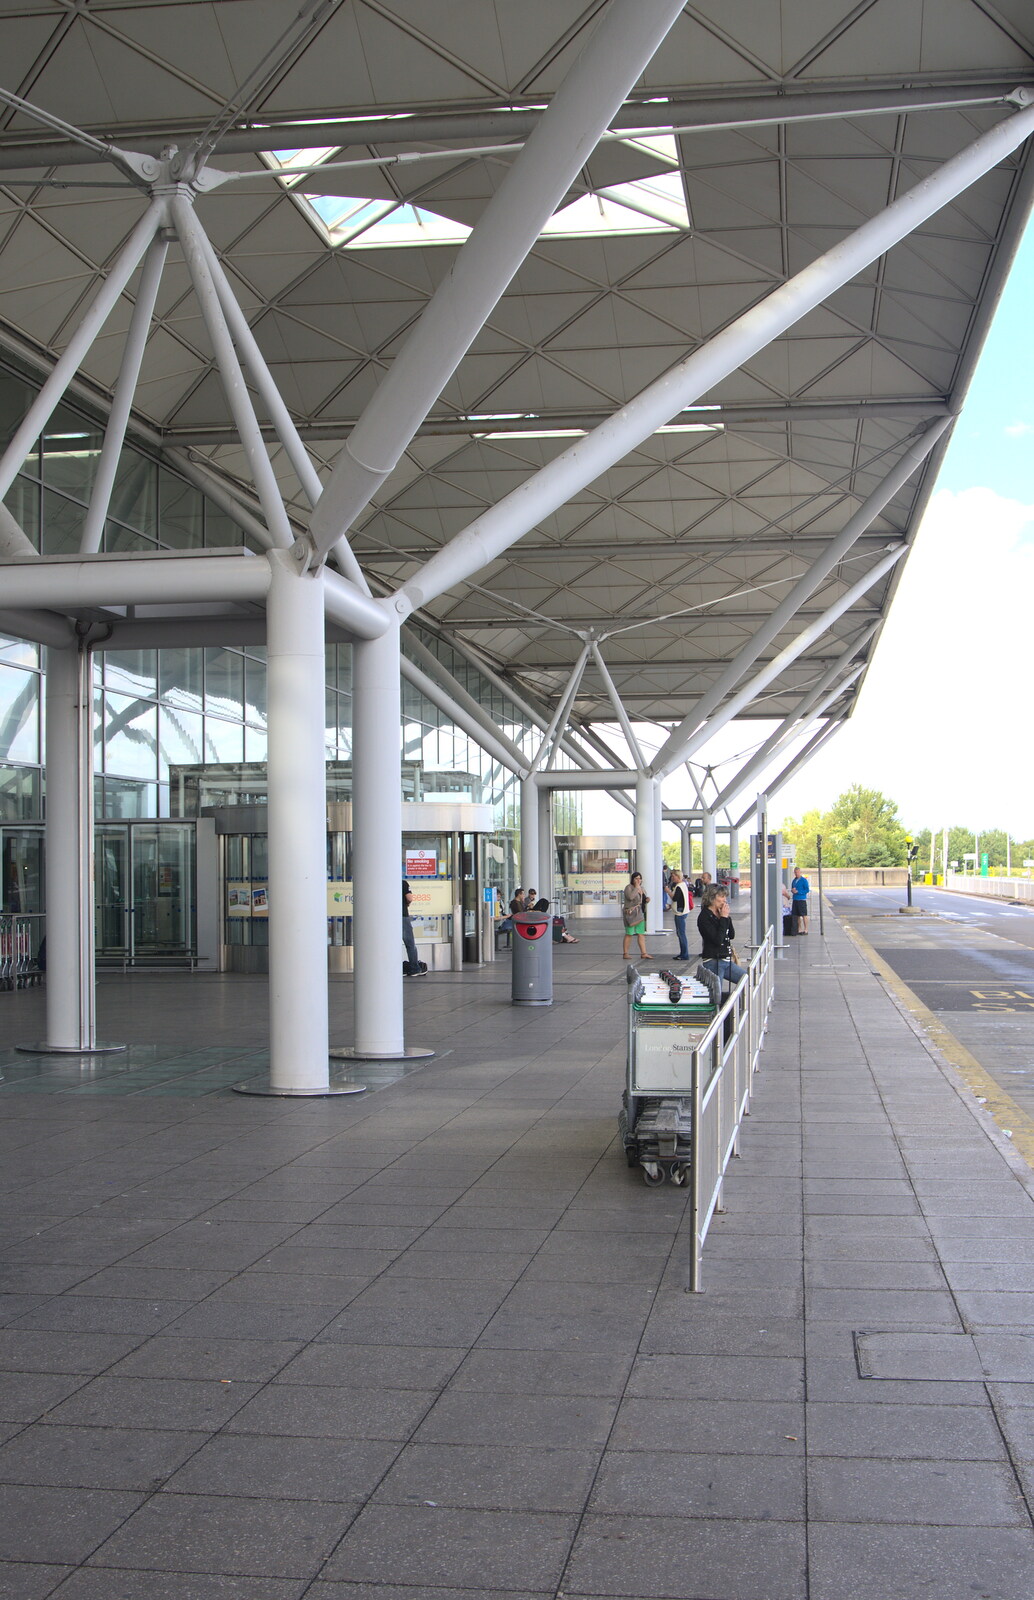 Outside Stansted airport from A Night Out in Dublin, County Dublin, Ireland - 9th August 2014